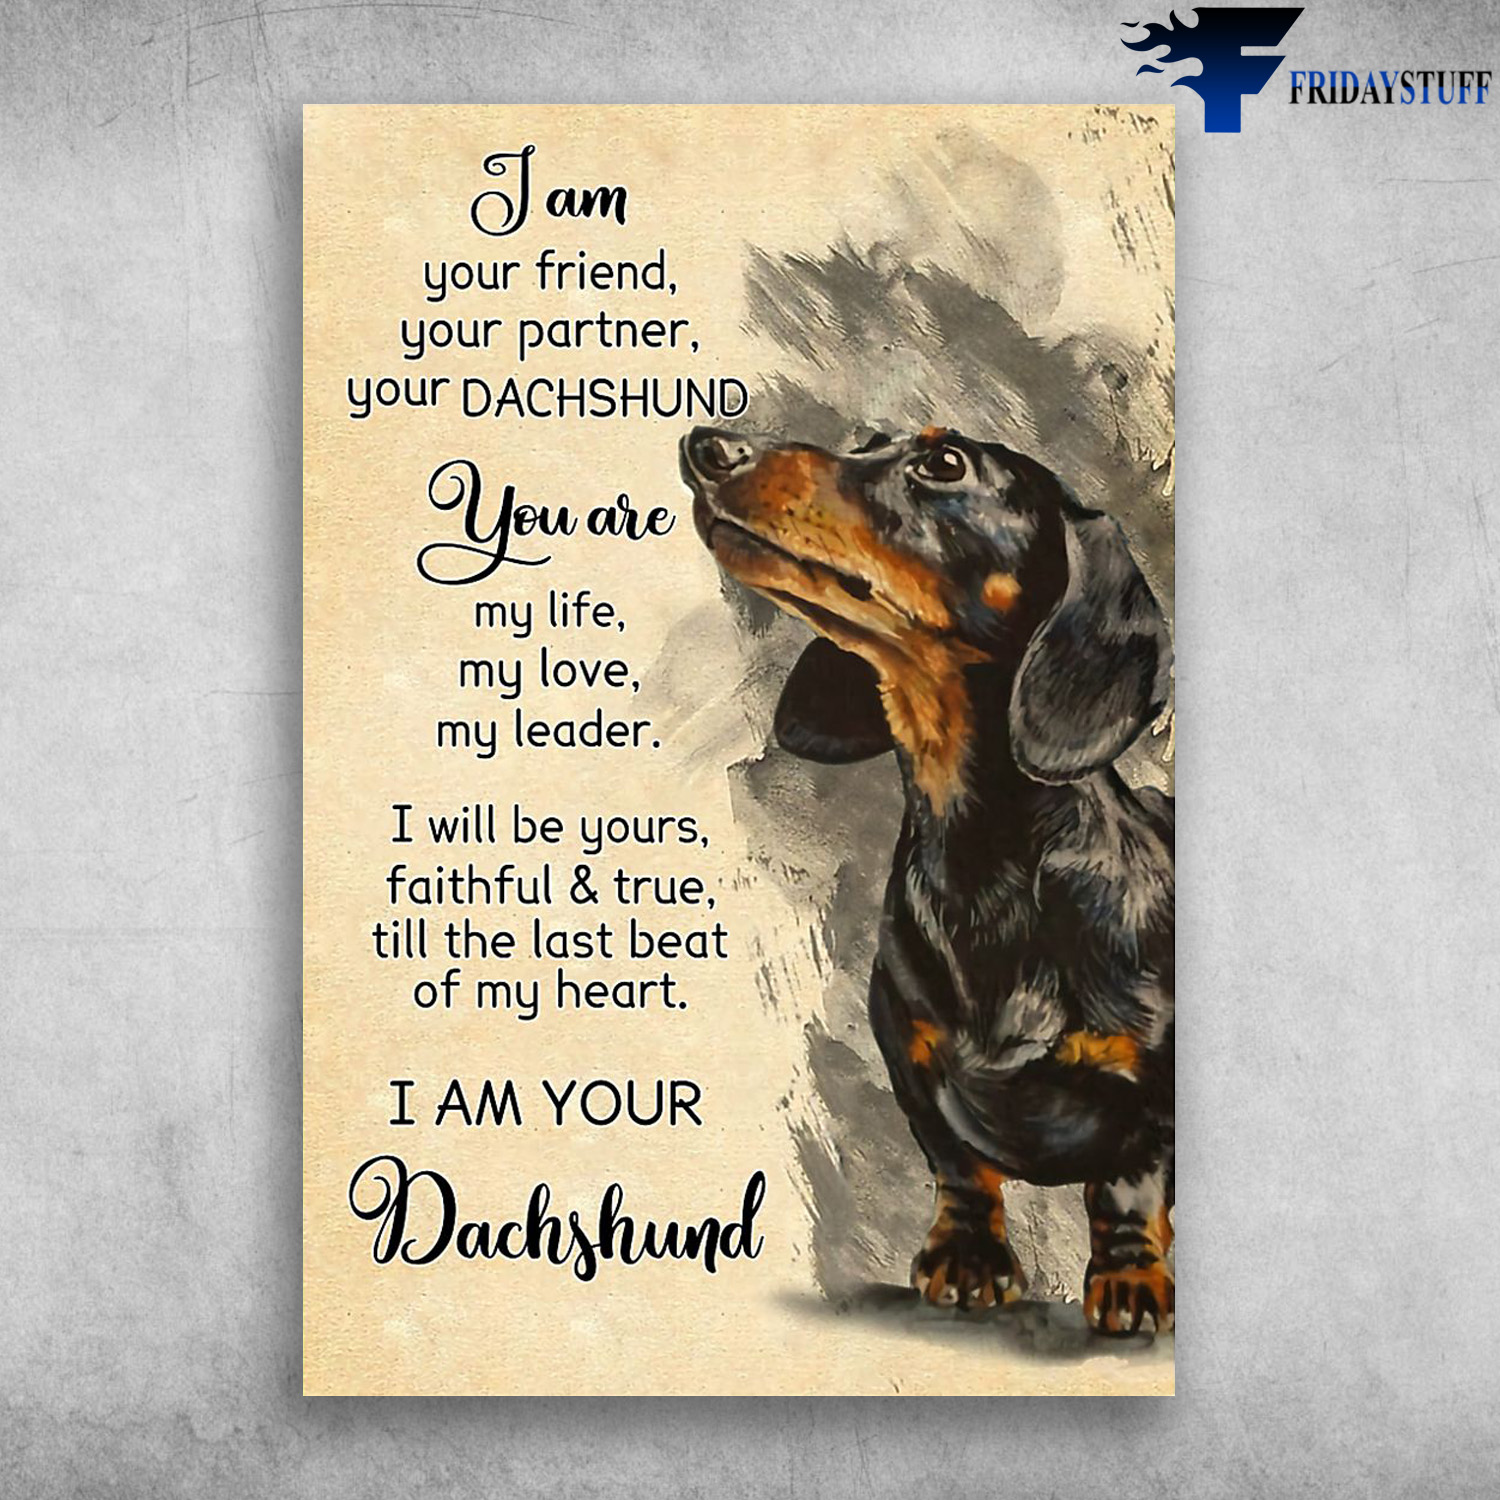 Dachshund Dog - I Am Your Friend, Your Partner, Your Dachshund, You Are My Life, My Love, My Leader, I Will Be Yours, Faithful And True, Till The Last Beat Of My Heart, I Am Your Dachshund